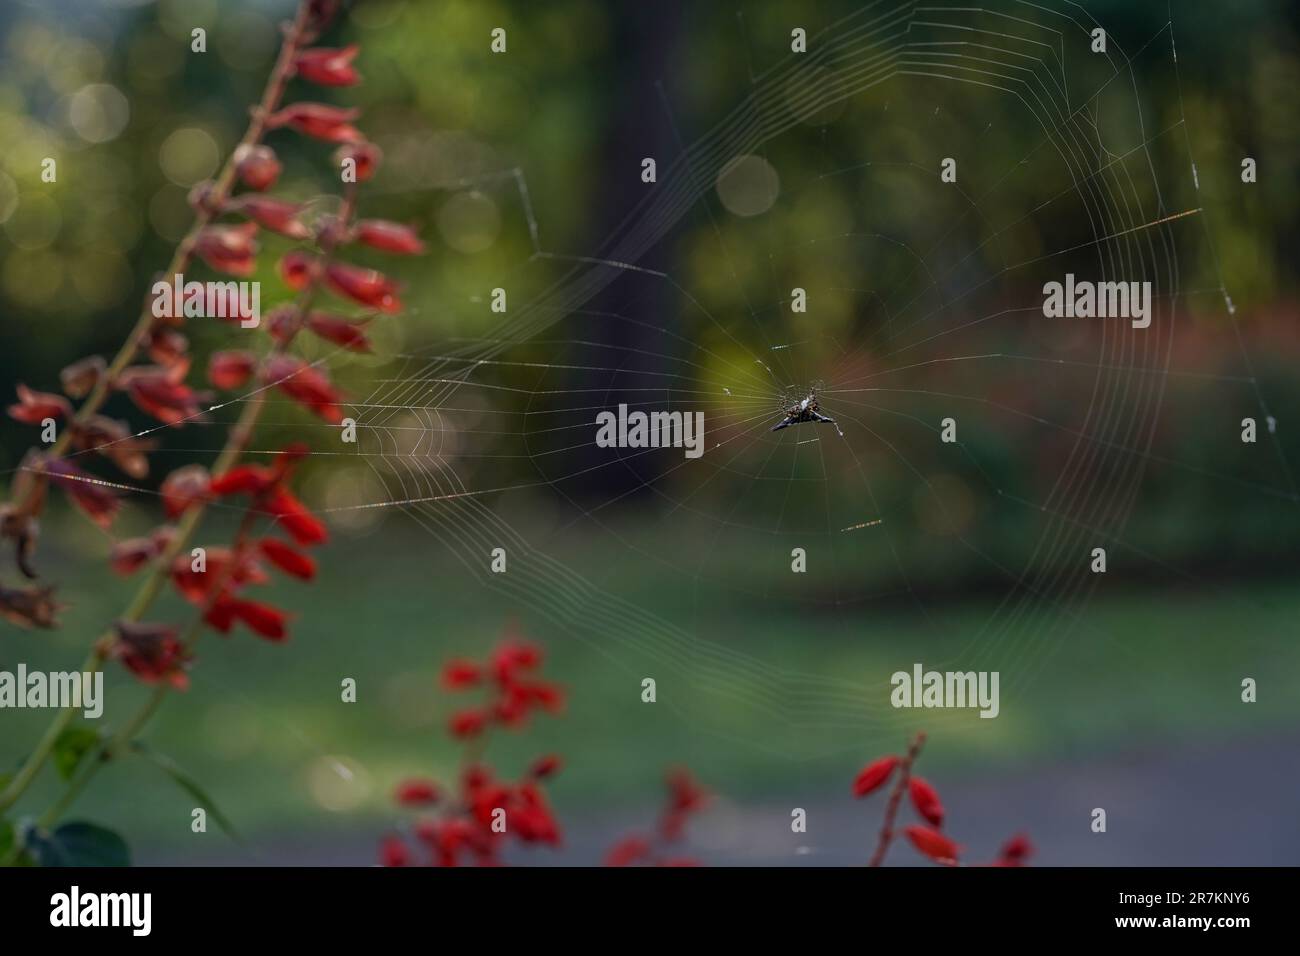 Nature's Intricacies: Close-Up of Spider Web with Tiny Red Flowers Stock Photo